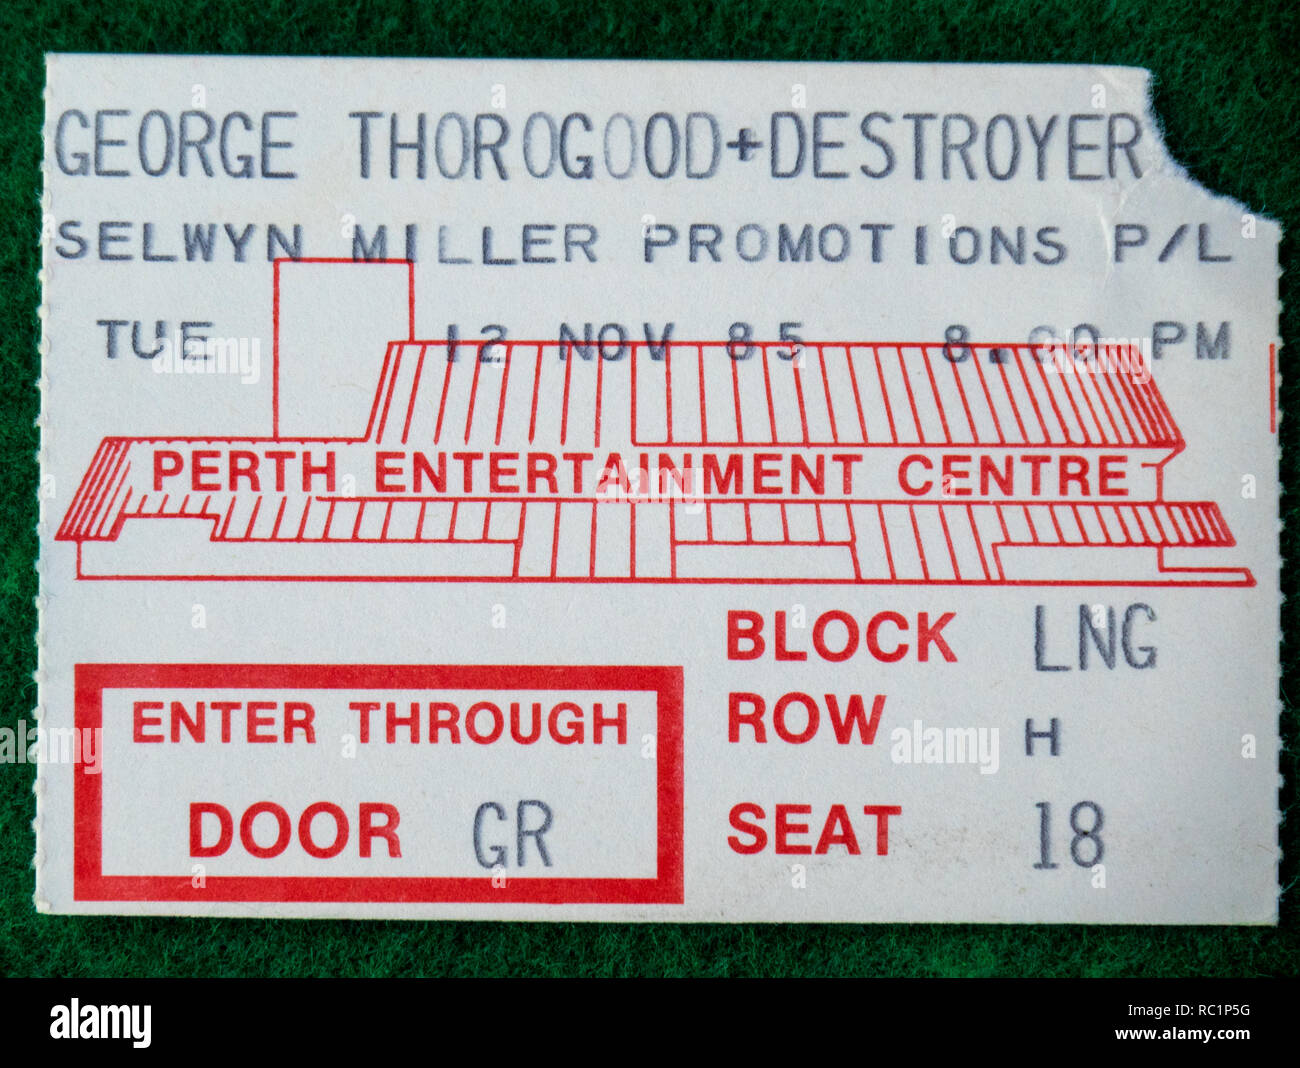 Ticket for George Thorogood and the Destroyers concert at Perth Entertainment Centre in 1985 WA Australia. Stock Photo